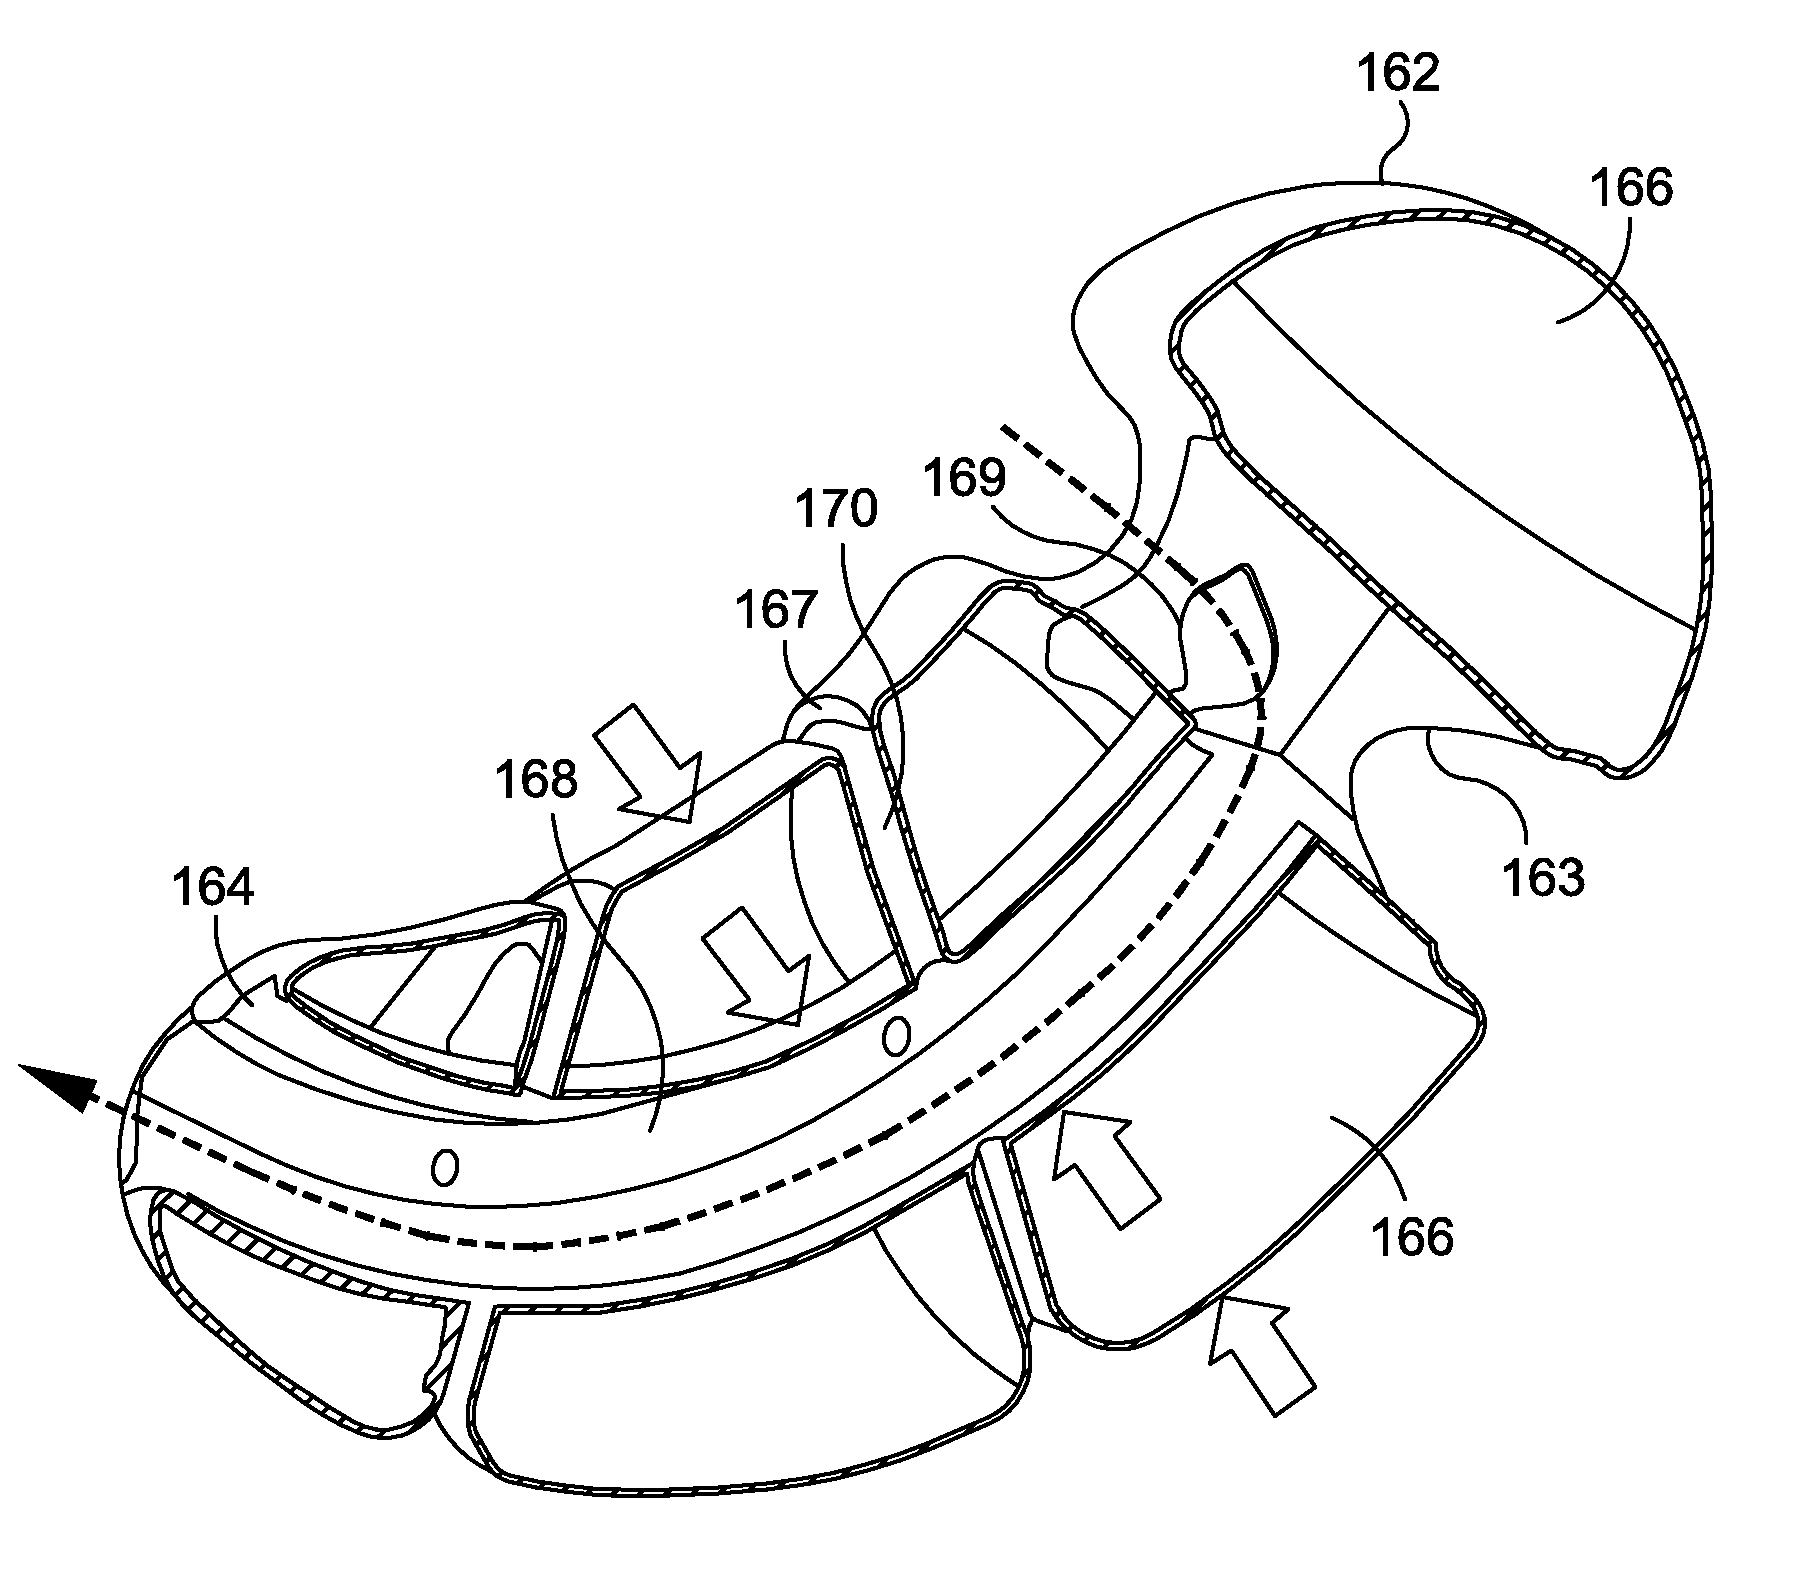 Space-filling intragastric implants with fluid flow